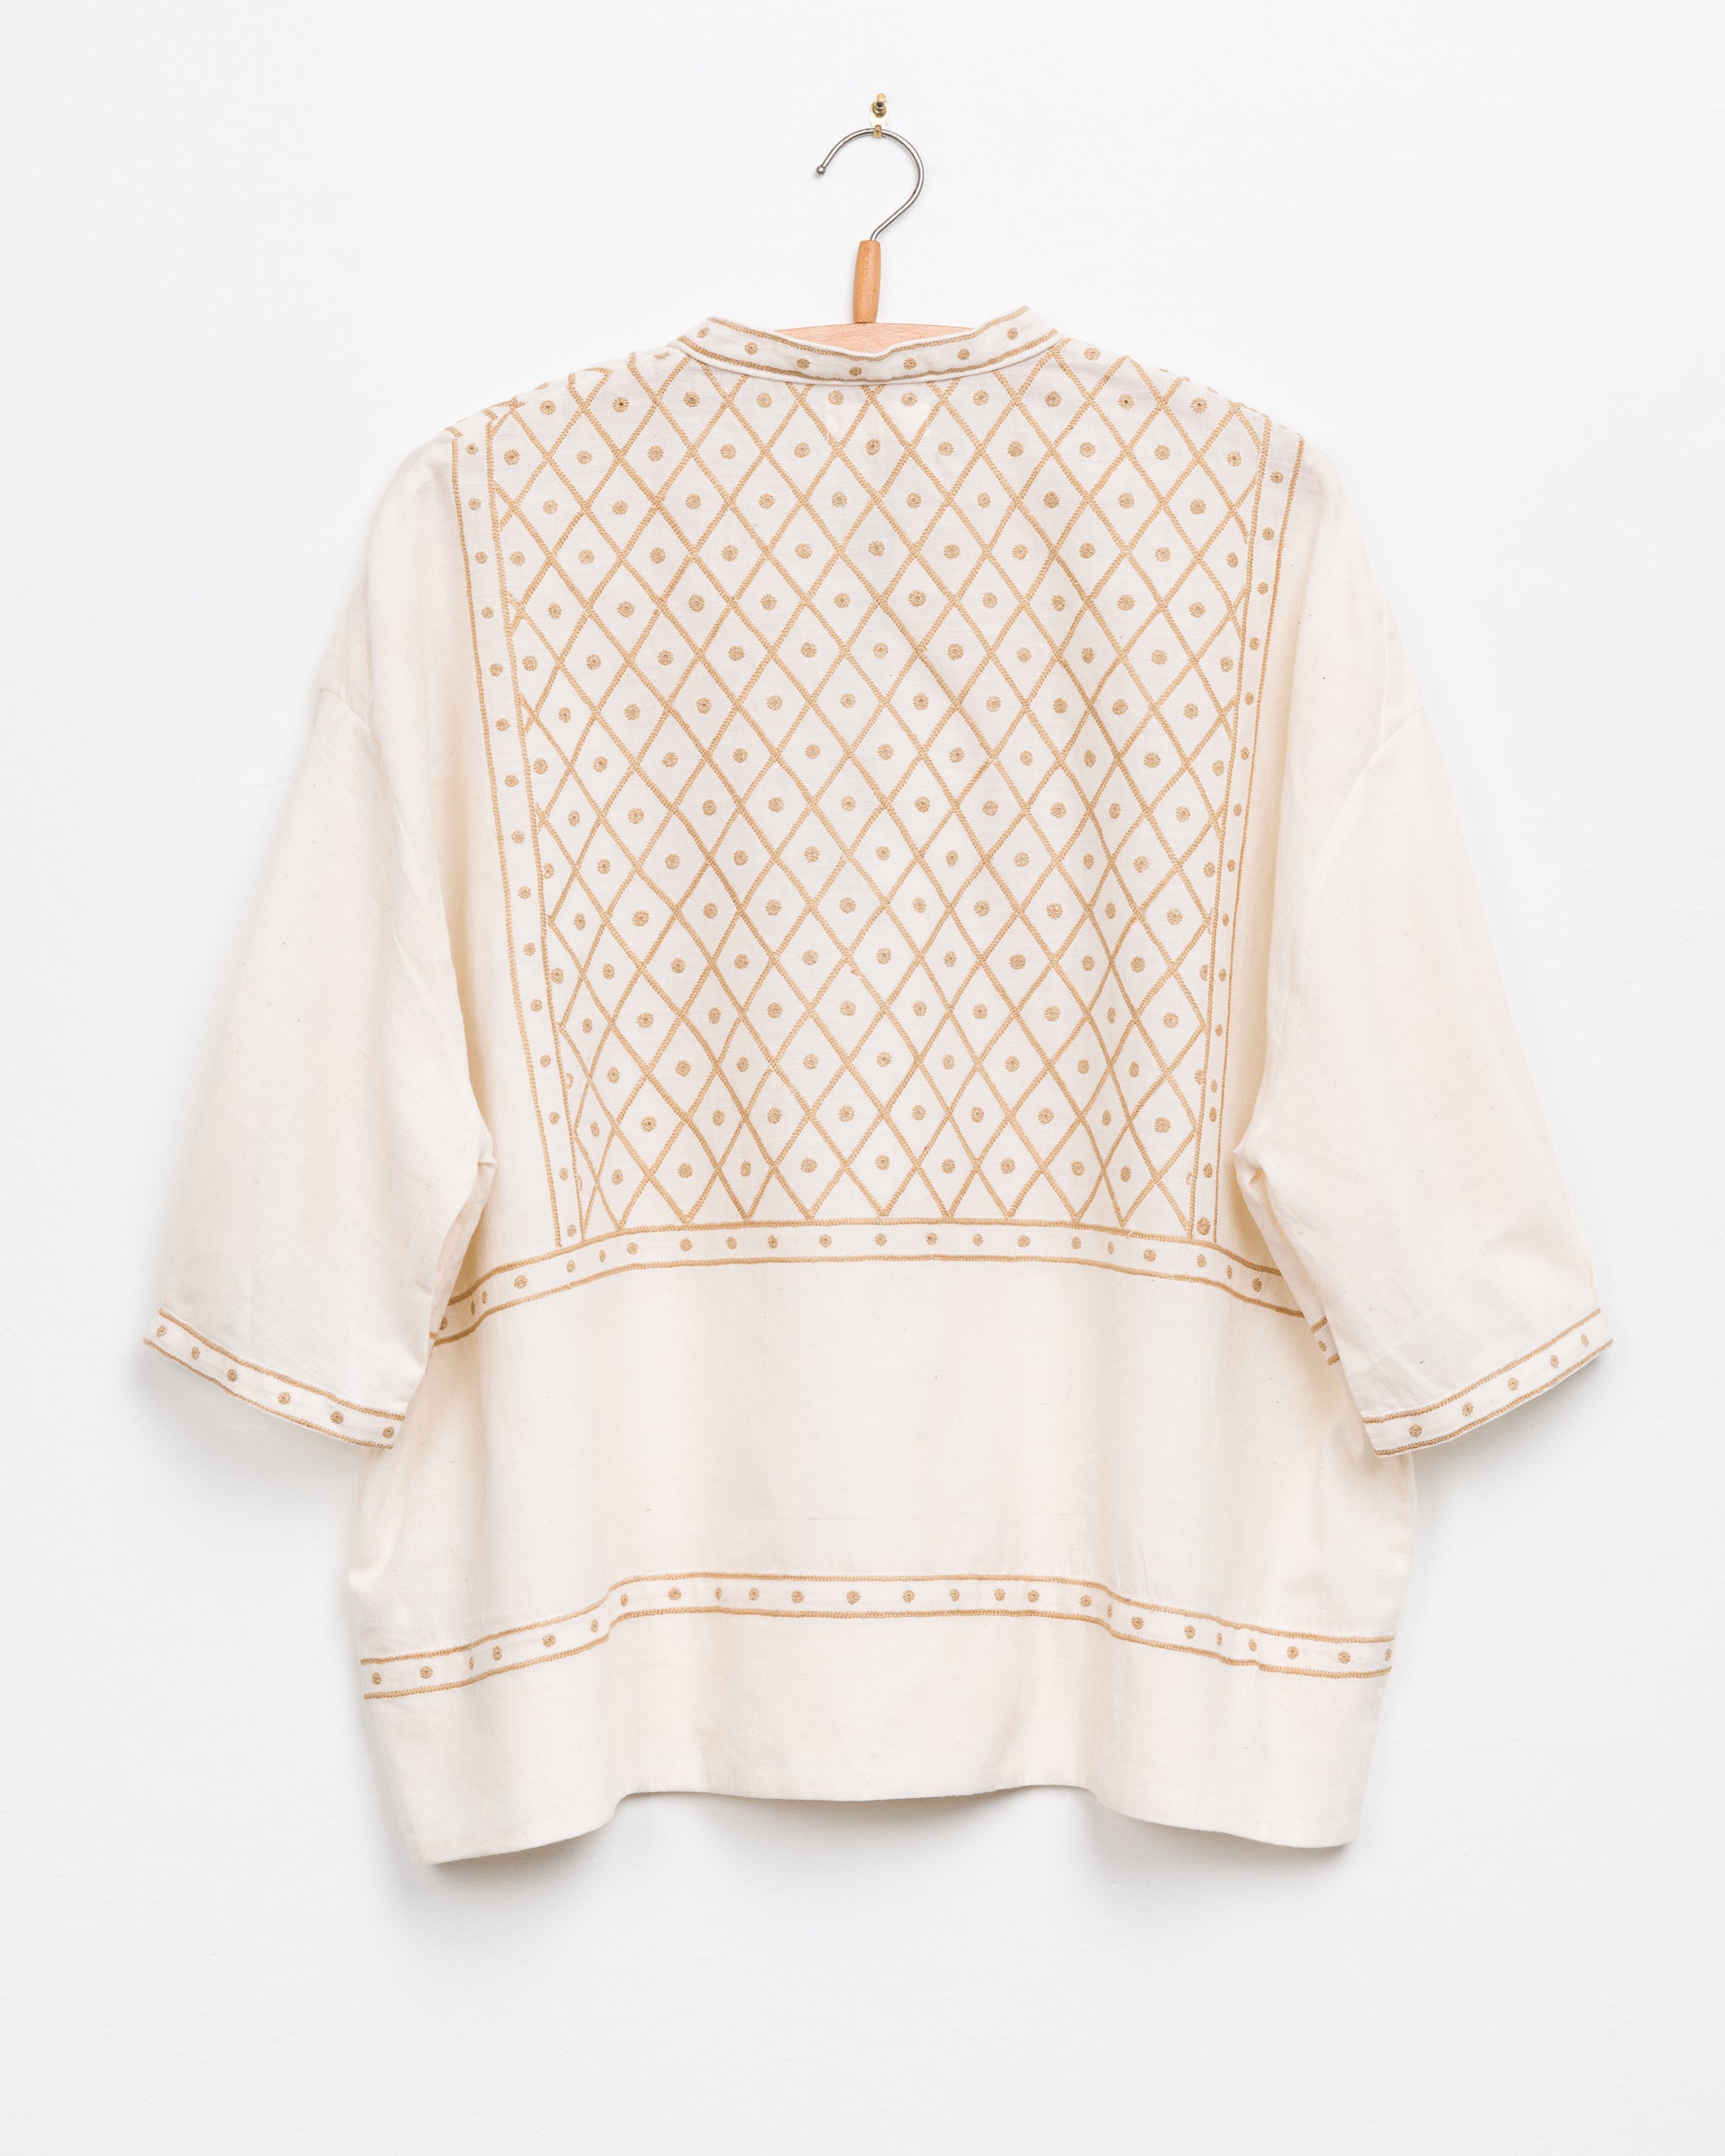 Hema Top in Embroidery MW